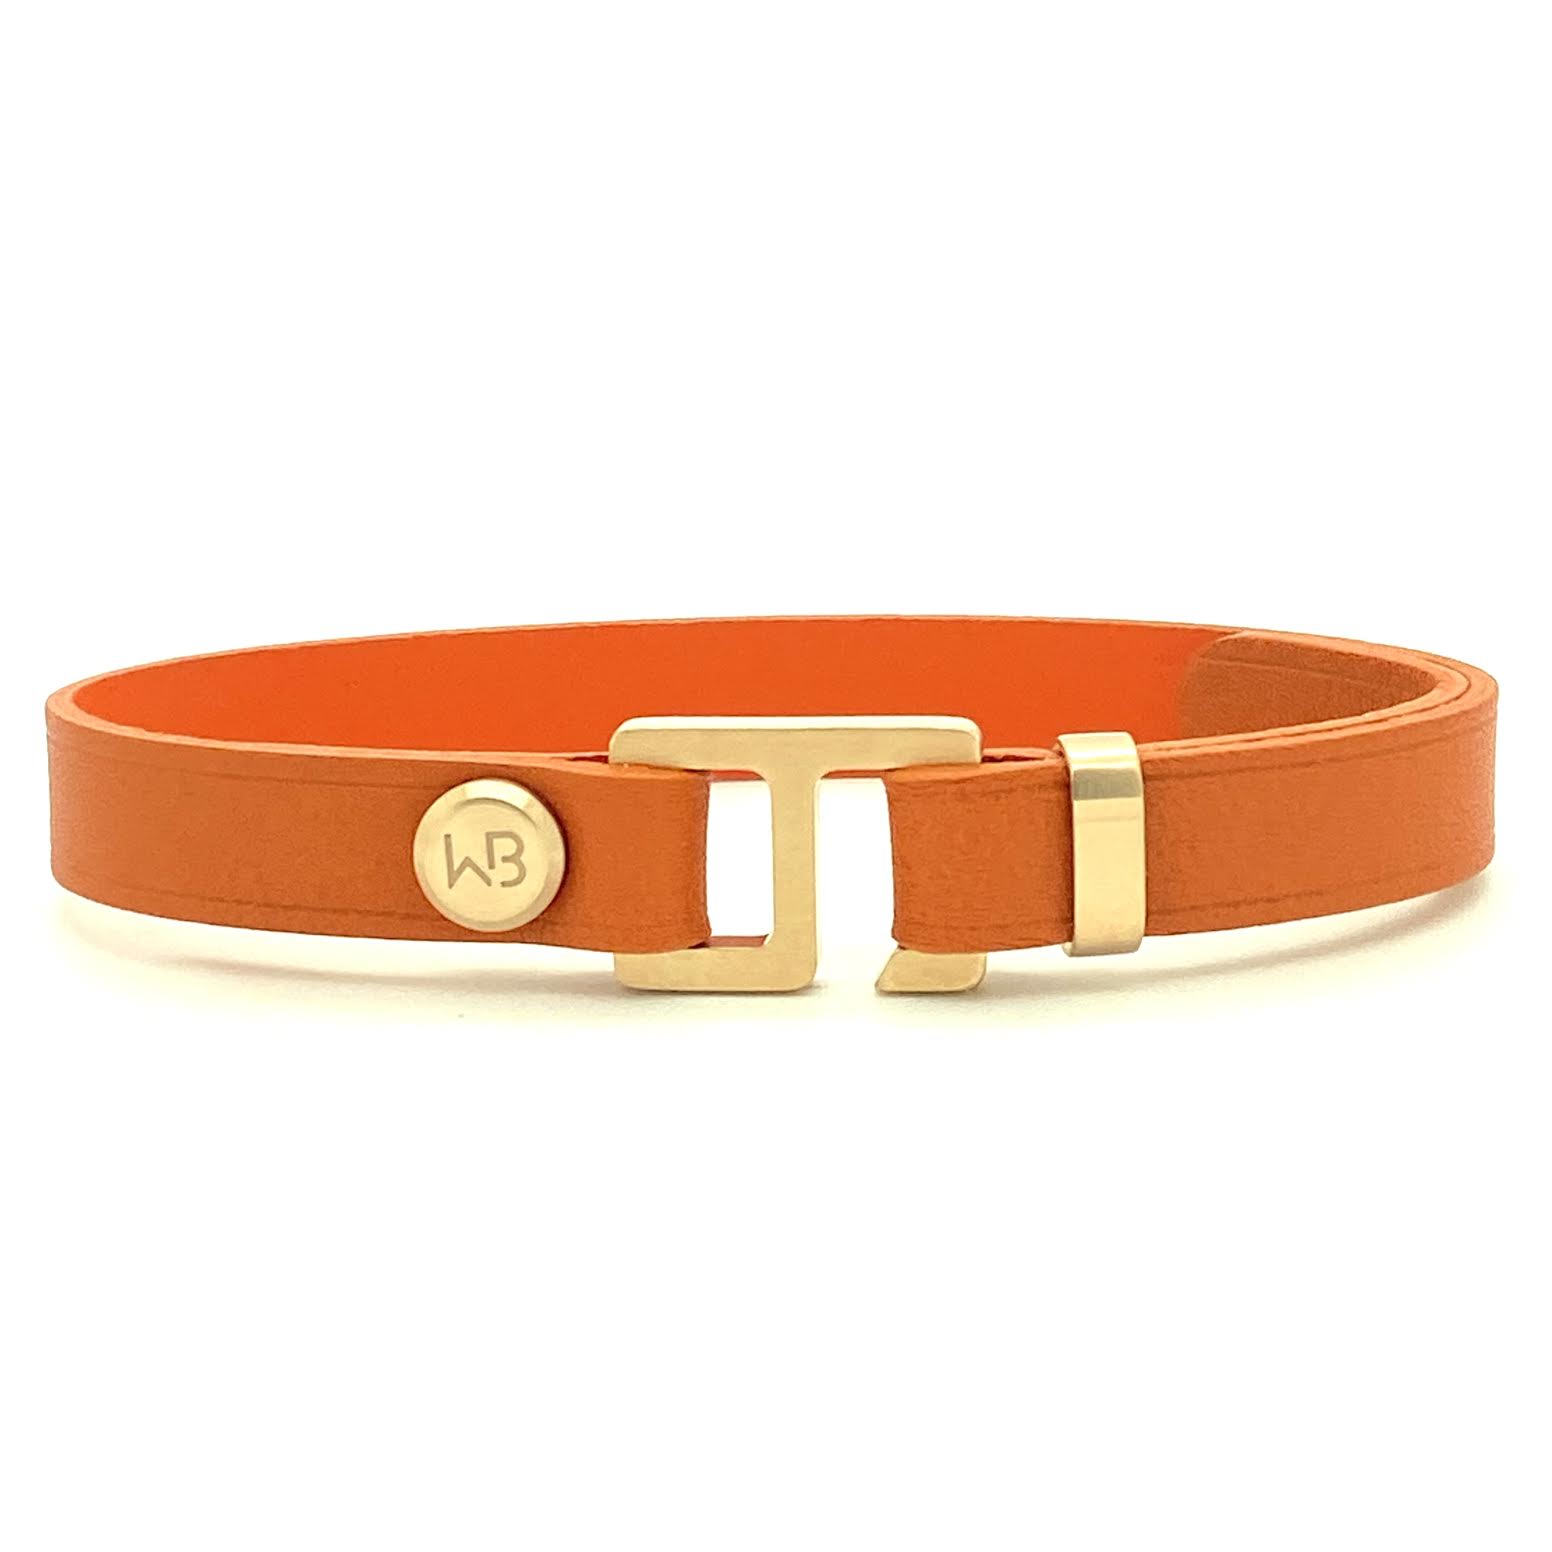 Trendy orange French and Italian leather cuff bracelet. Made by WristBend